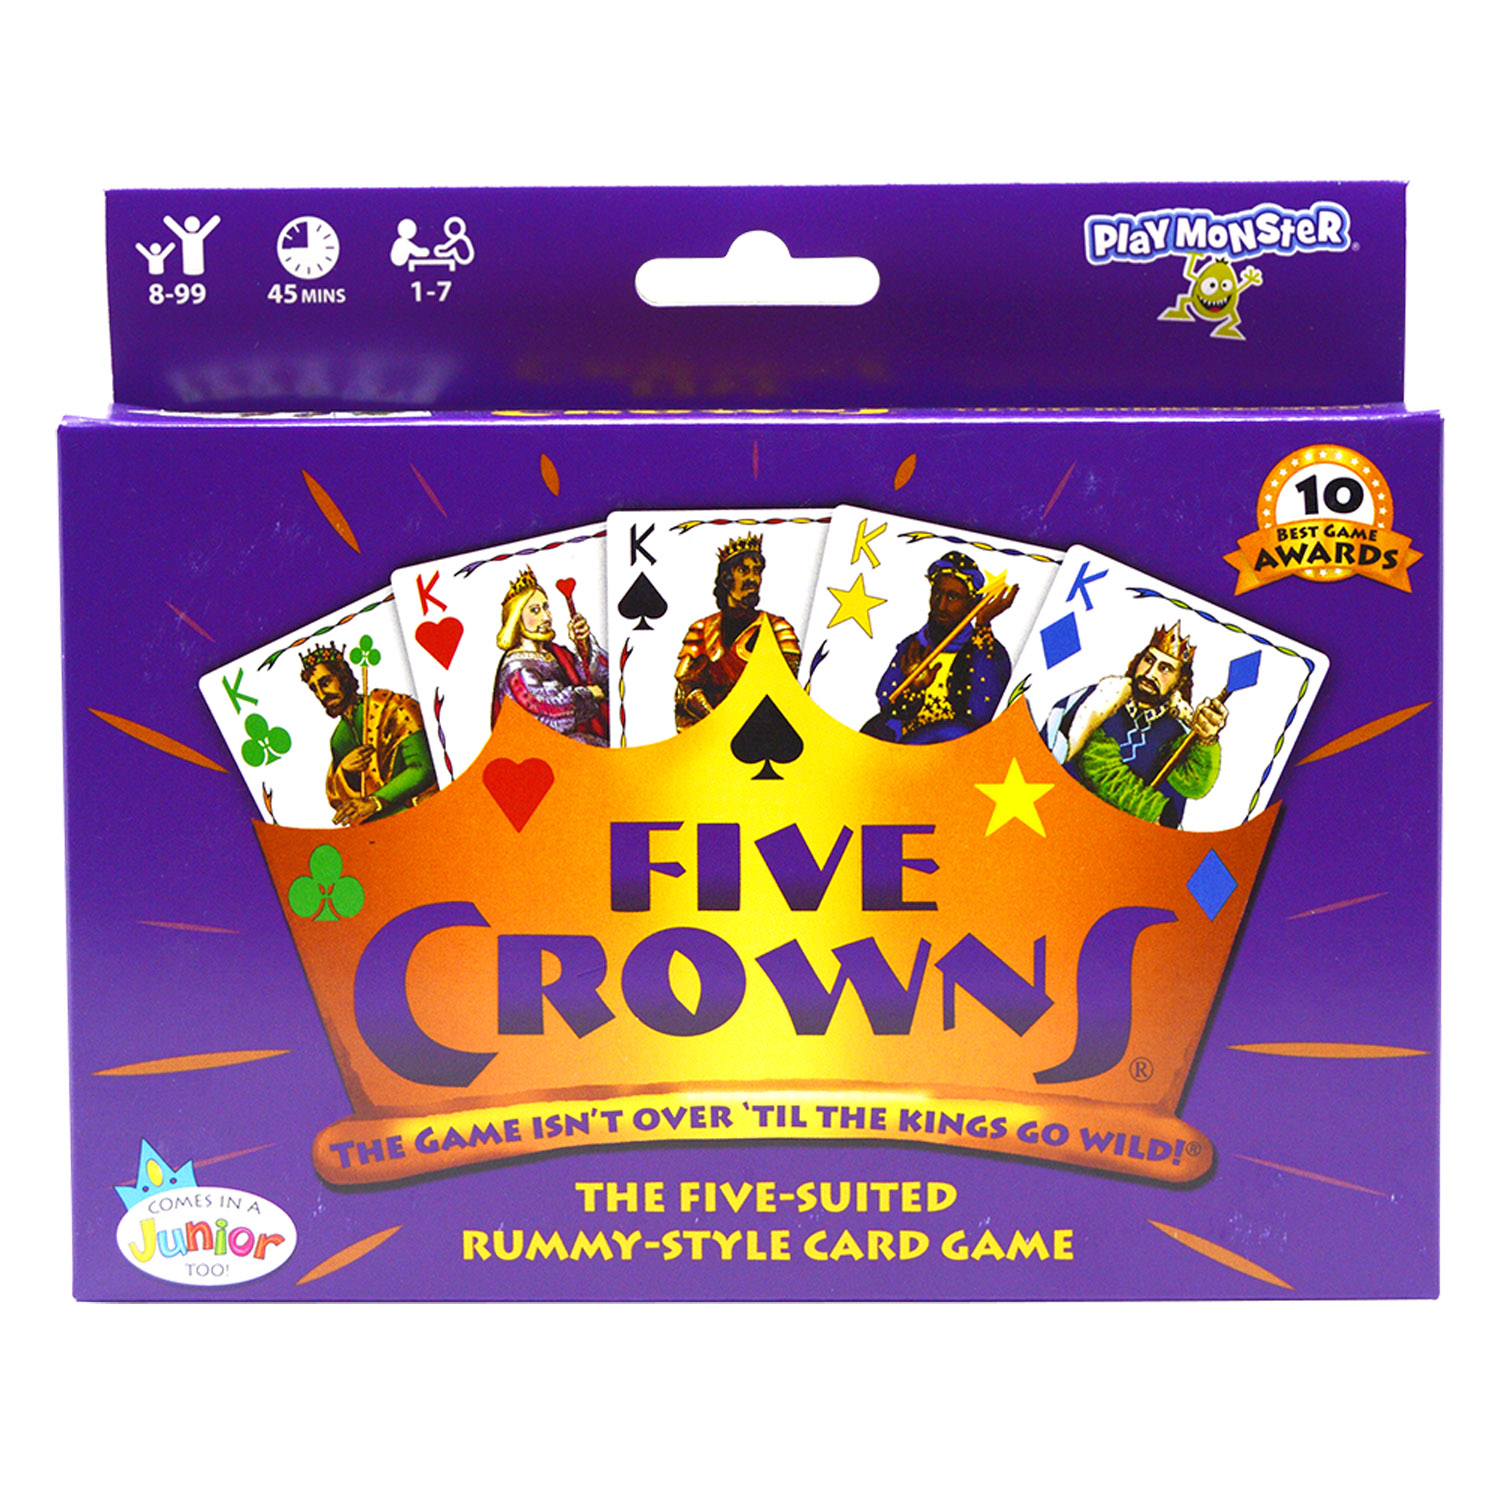 Five Crowns Card Game, Rummy Style, Kids Game, Family Game, Fun Game - image 1 of 2